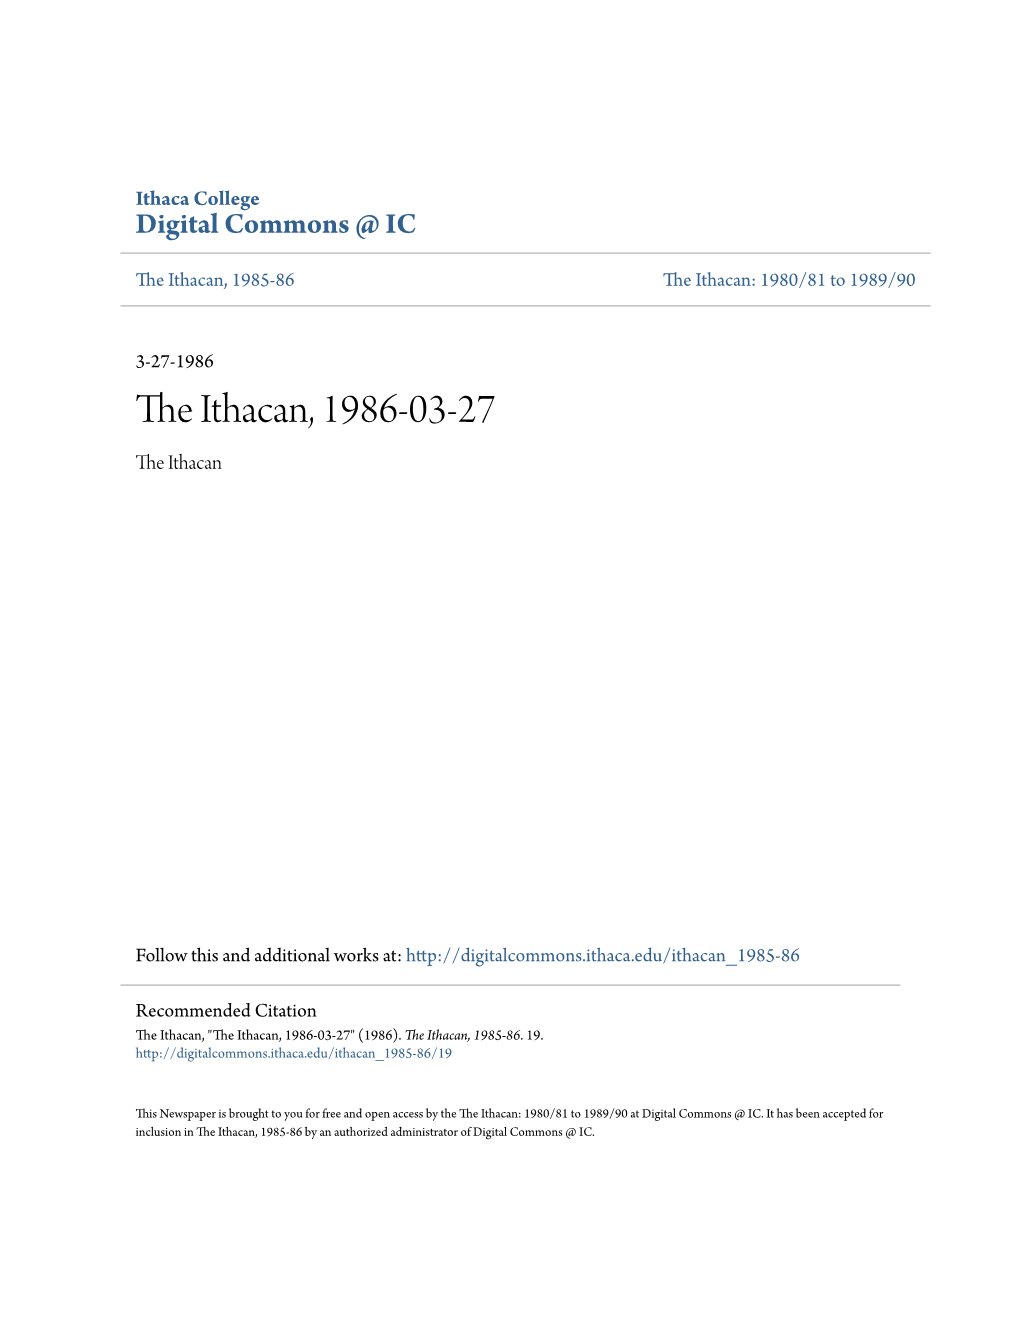 The Ithacan, 1986-03-27